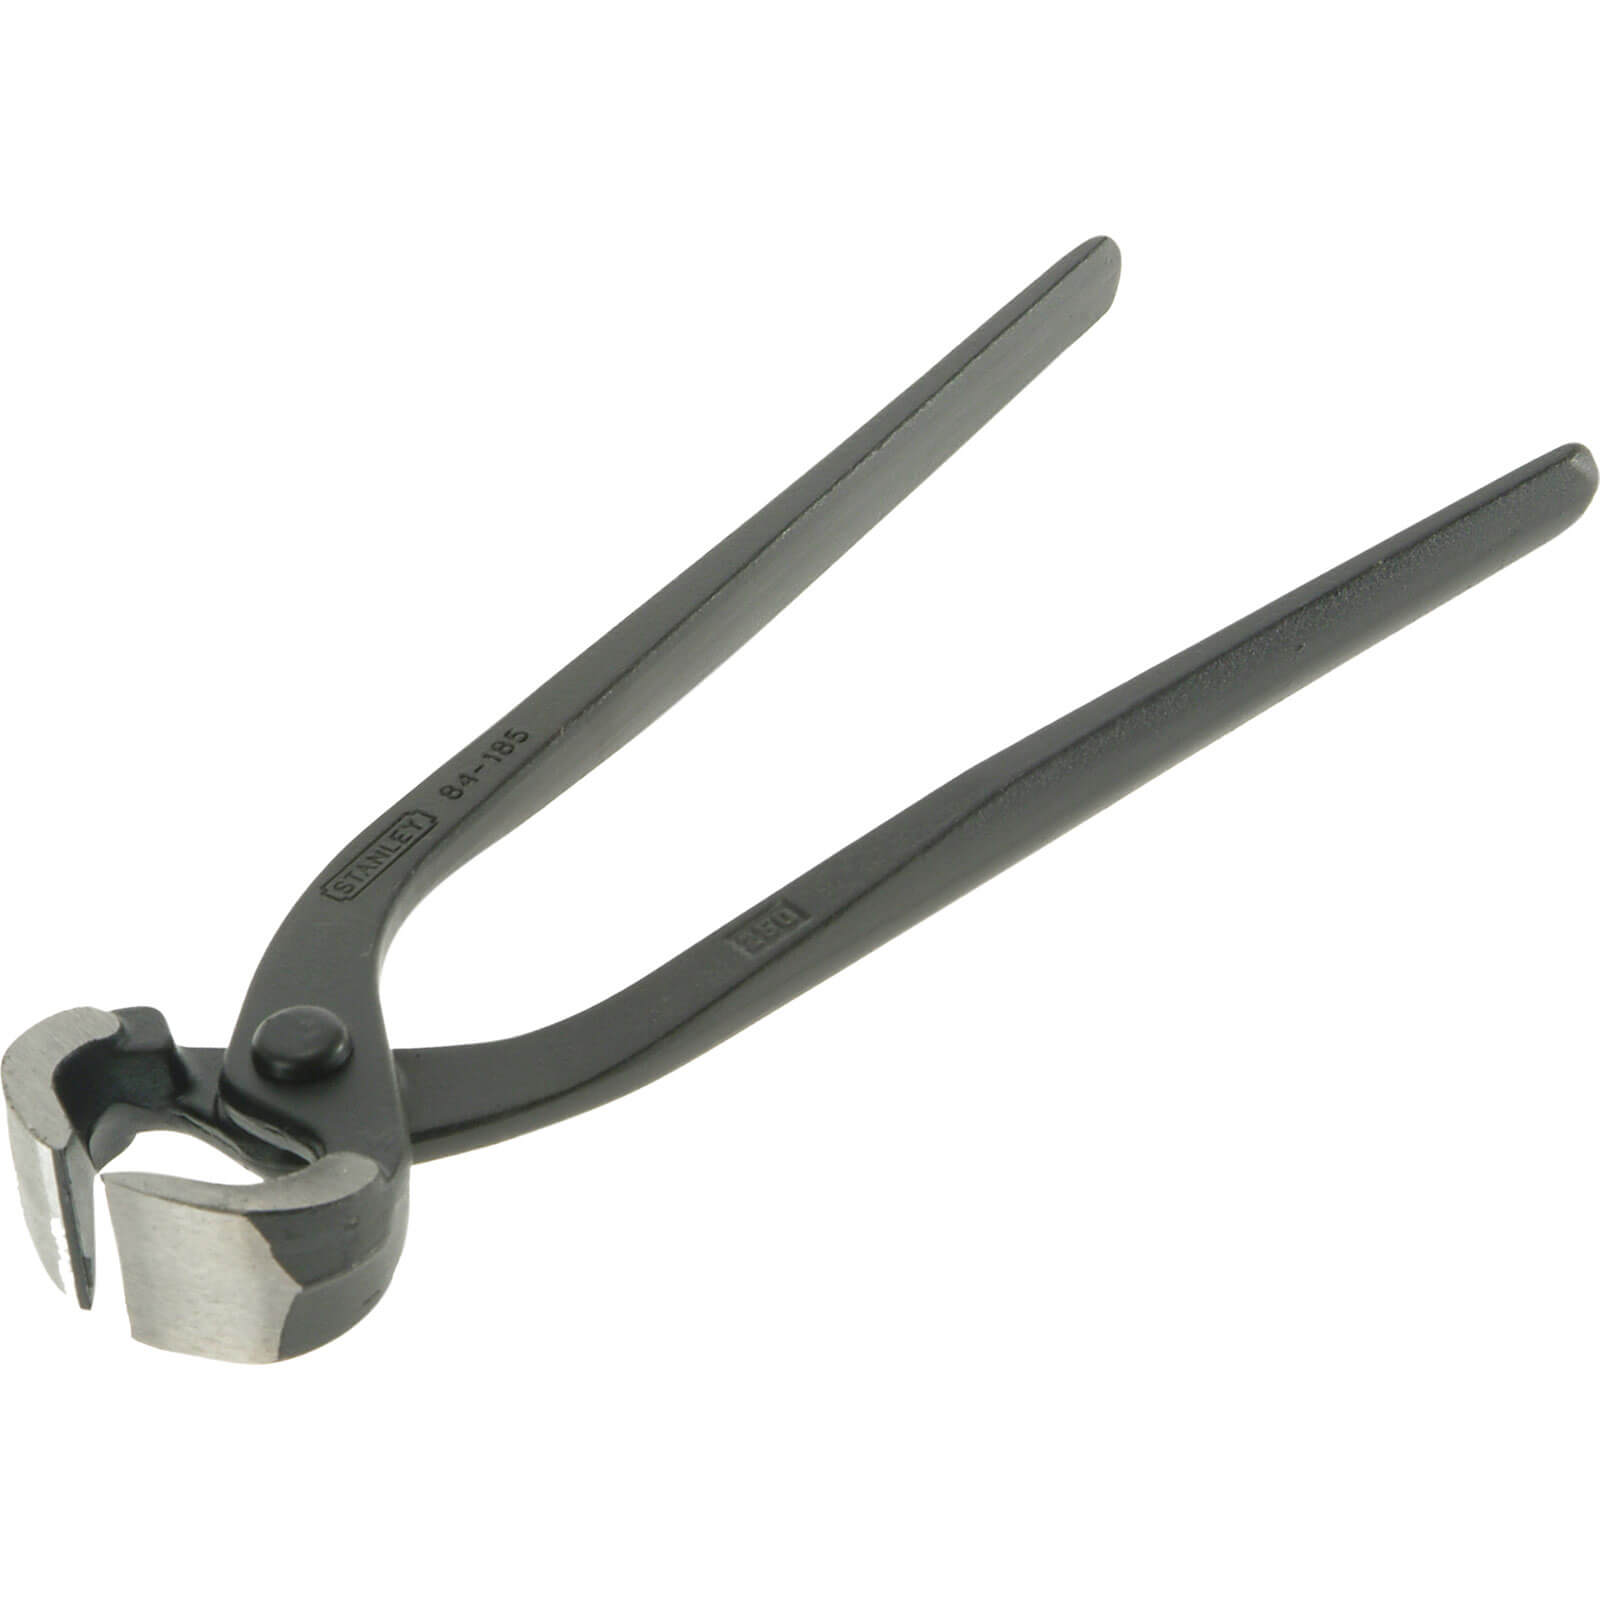 Image of Stanley Carpenters Pincers 10" / 250mm